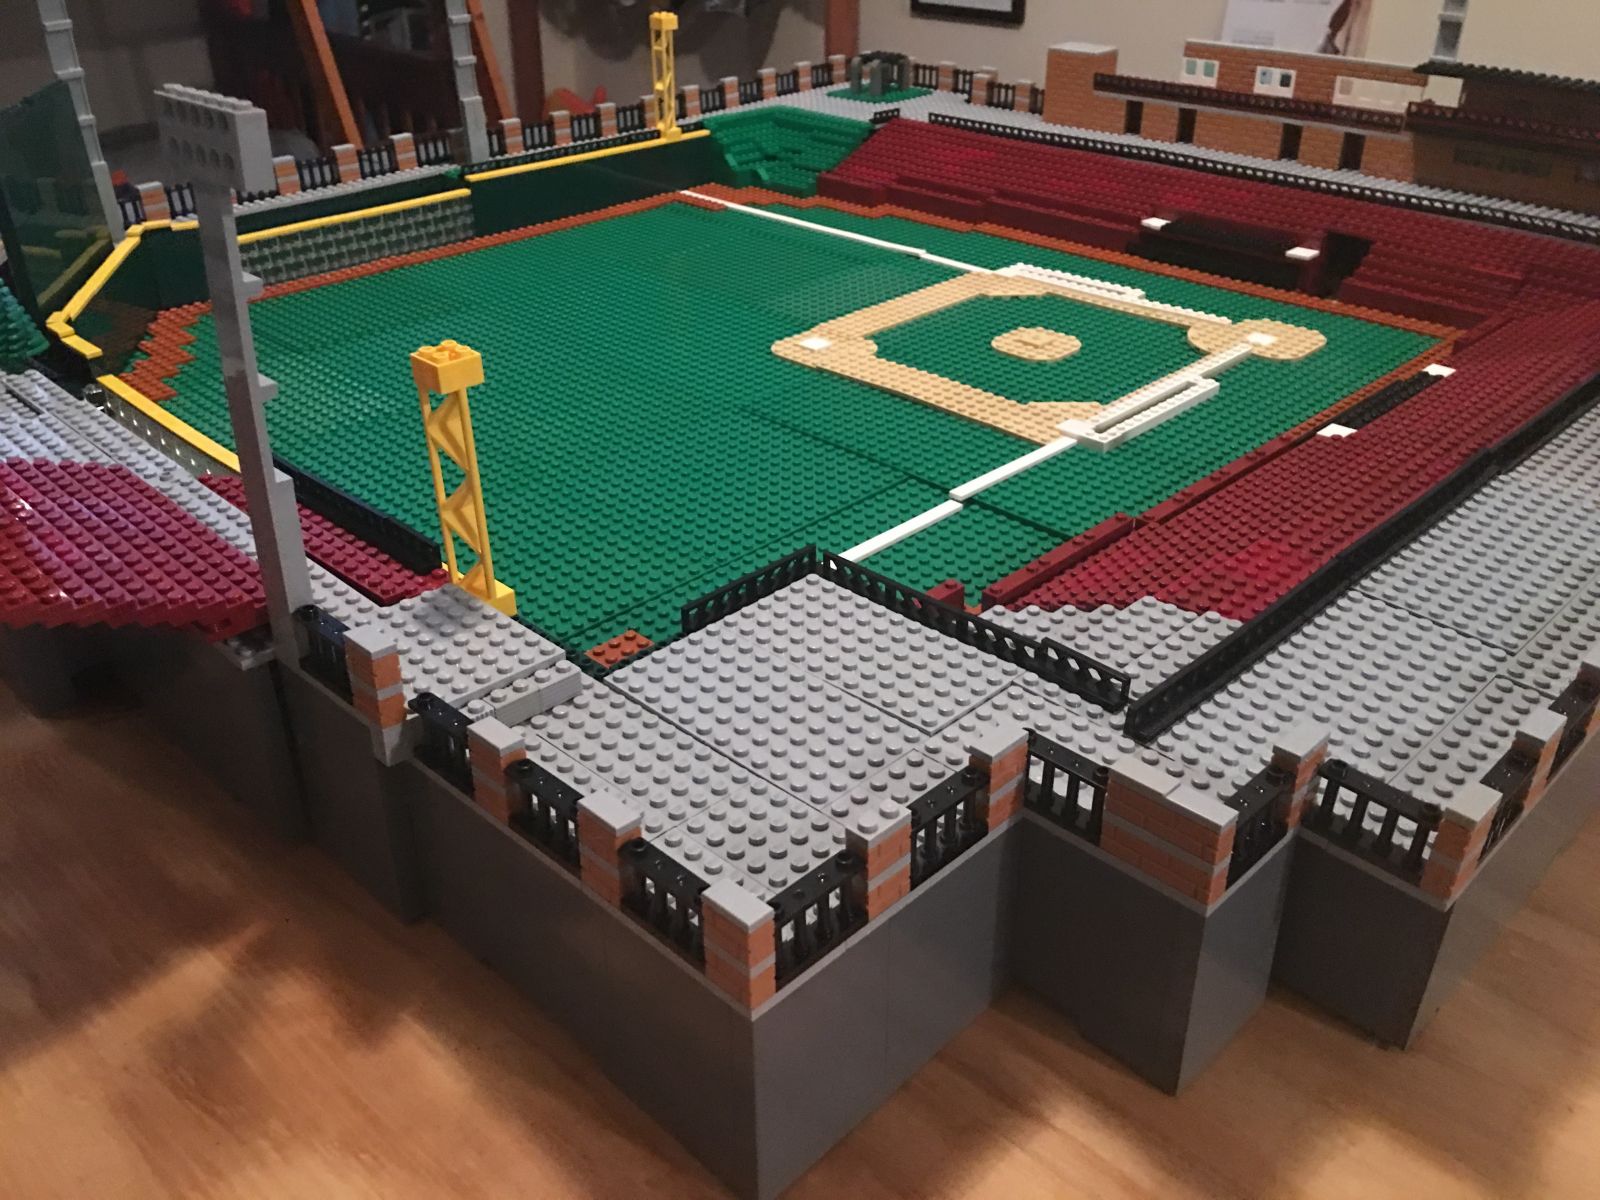 A Lego replica of USC's Founders Park. (Photo/Provided)